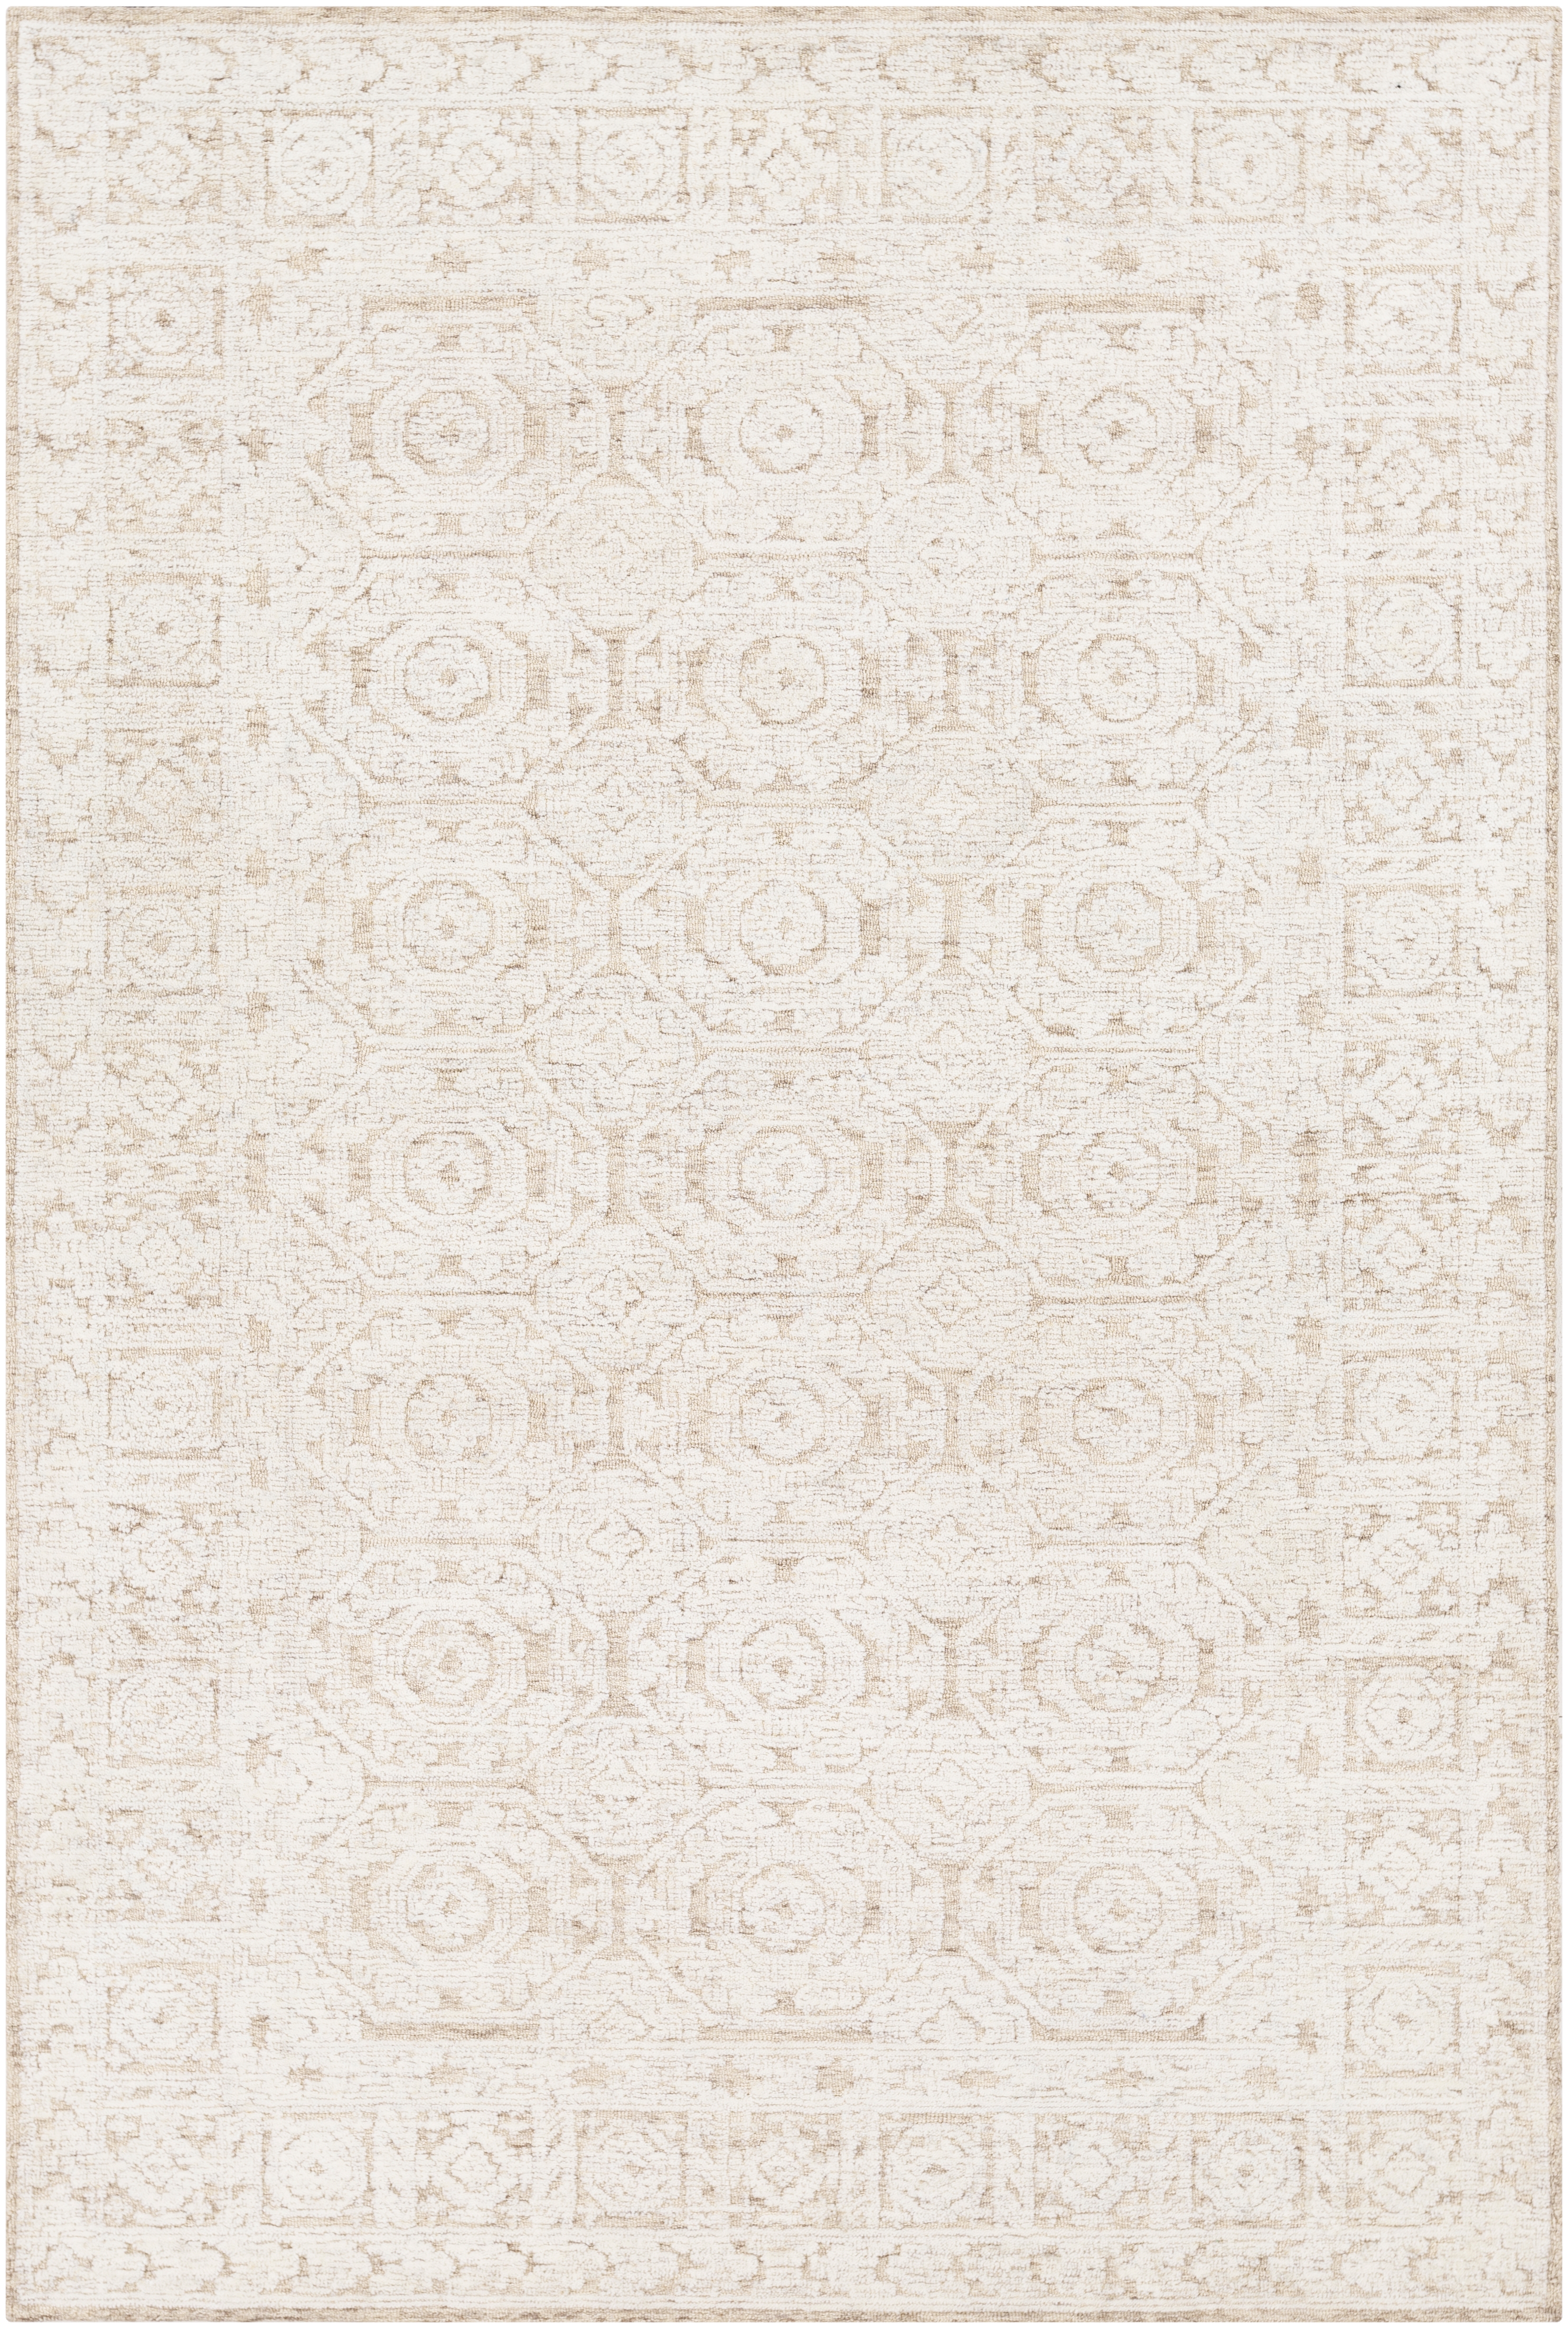 Louvre Rug, 8' x 10' - Image 0